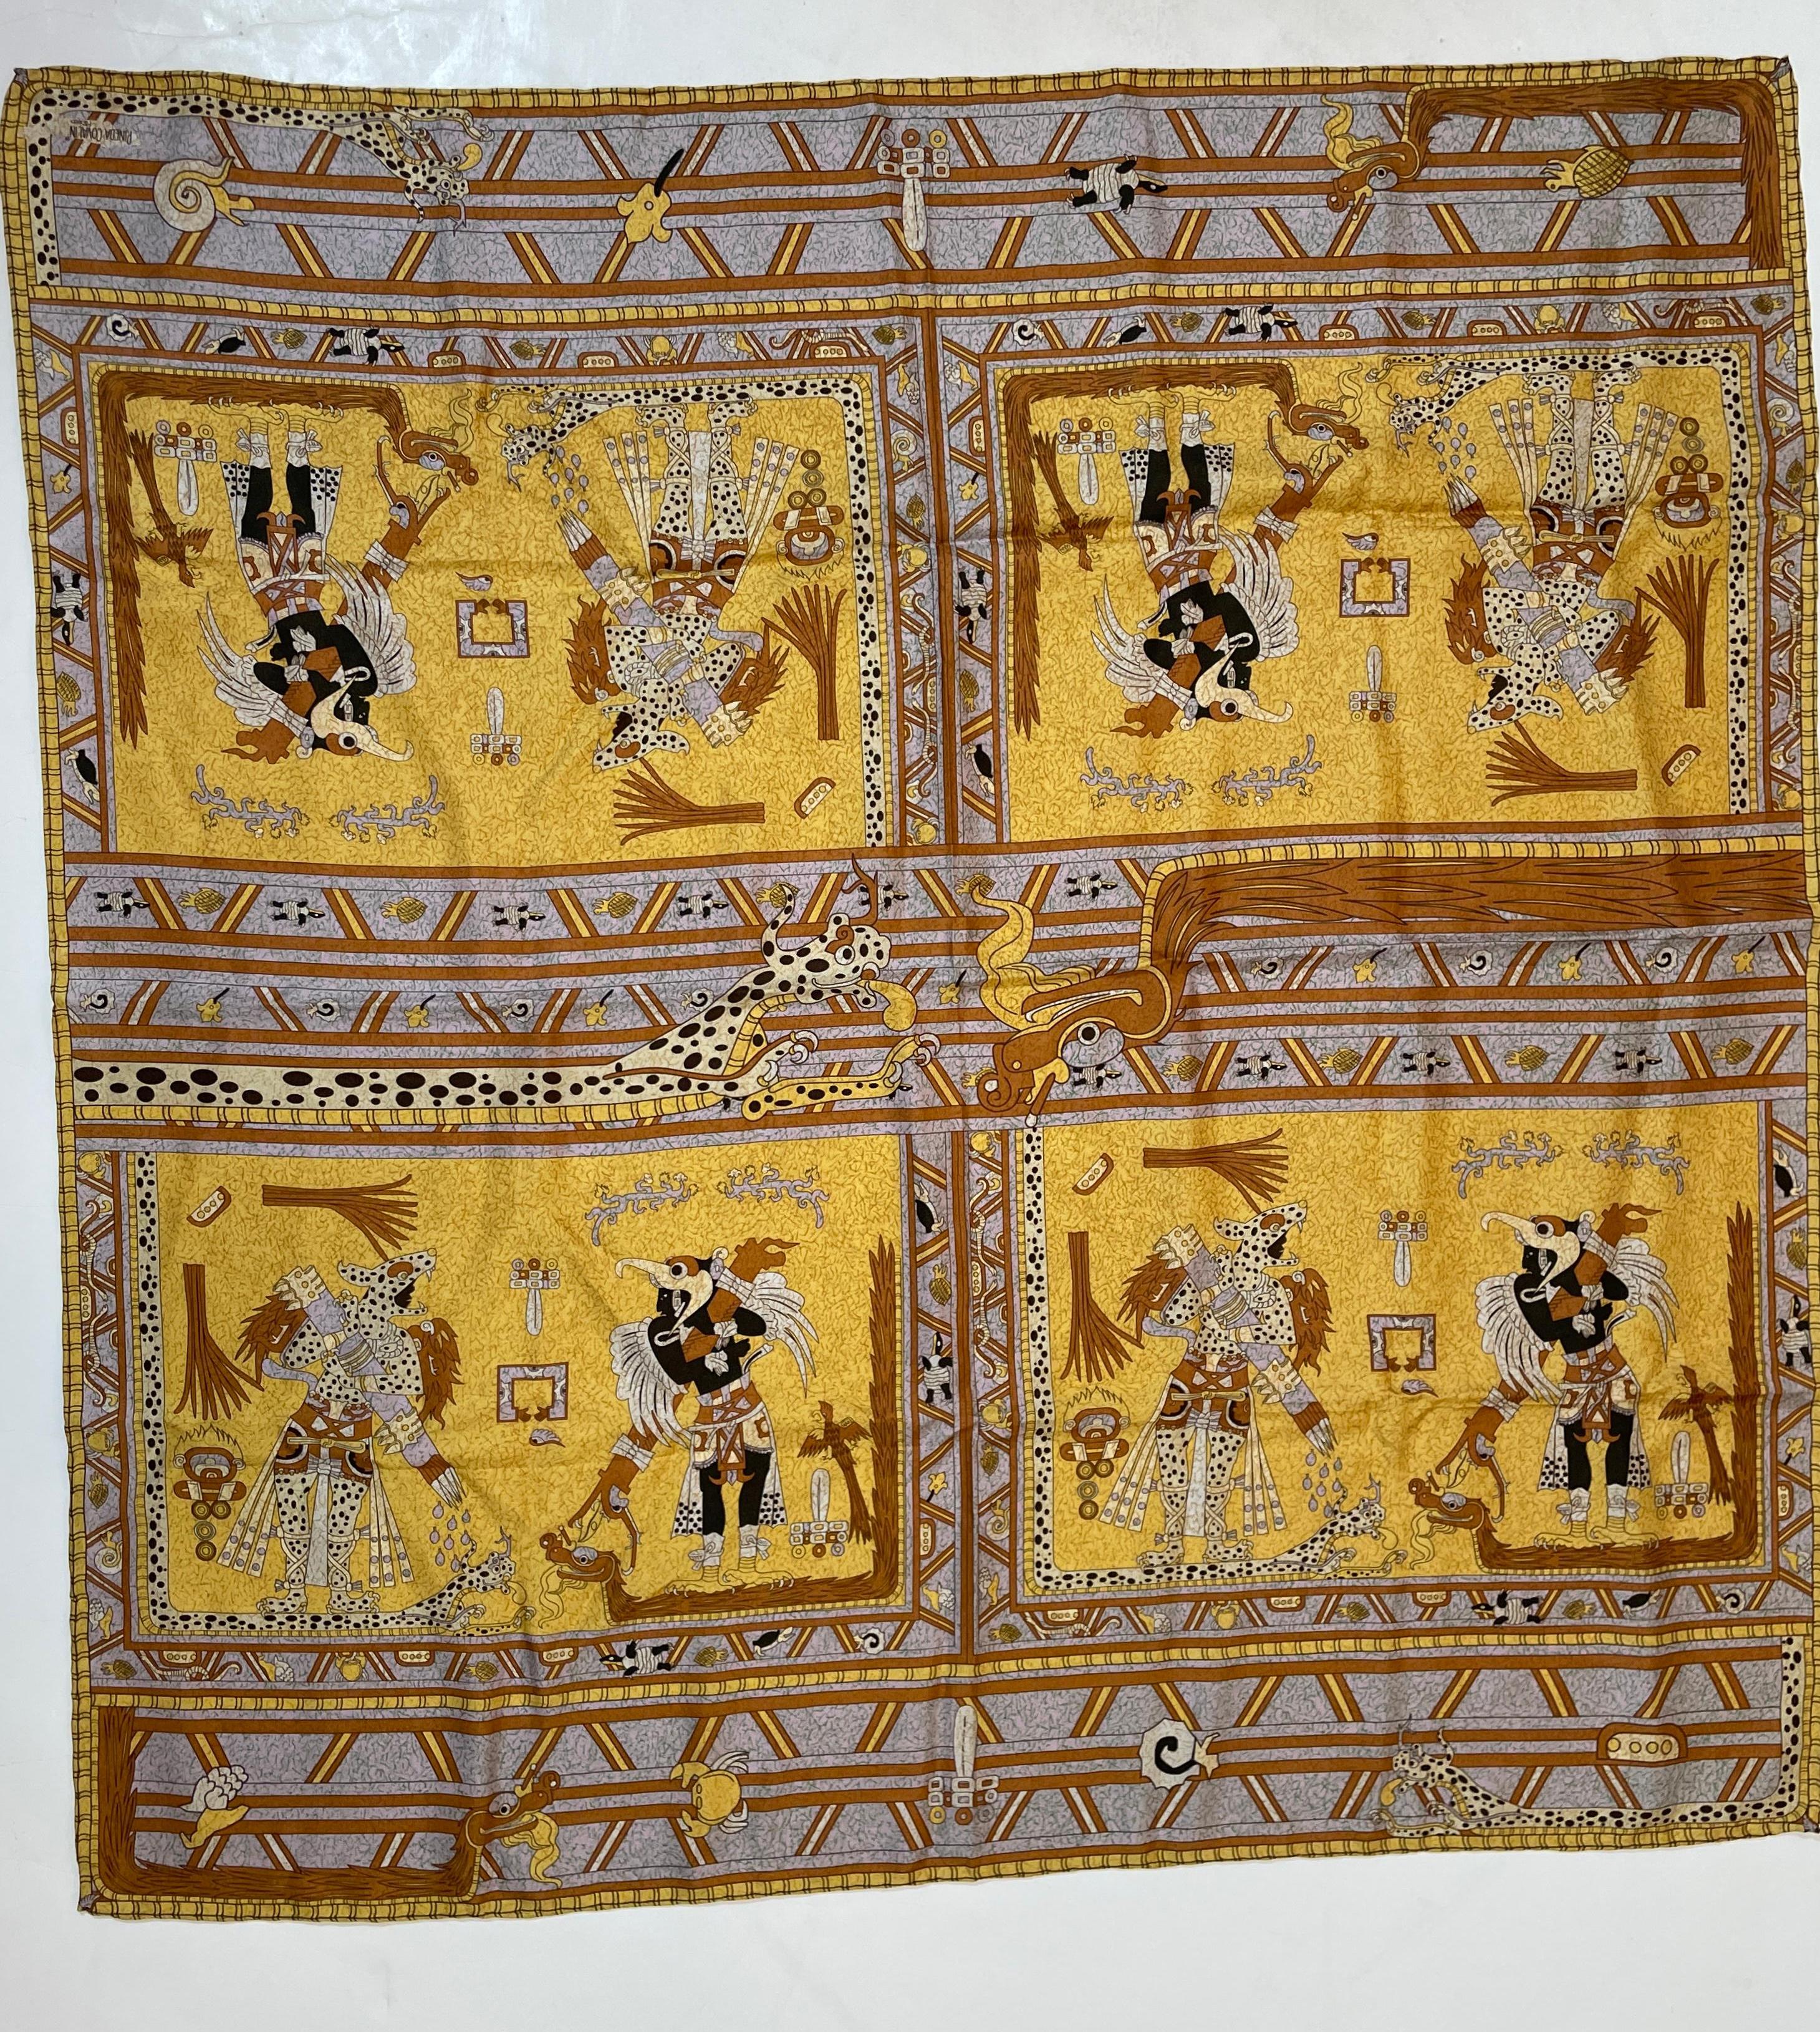 Pineda Covalin Signed Silk Scarf designed in Mexico with traditional Aztec Mayan design.
100 % silk hand rolled edges.
Great gold and brown colors.
100% silk scarf with colorful designs inspired by Mexican mythology, from magical places, fantastic